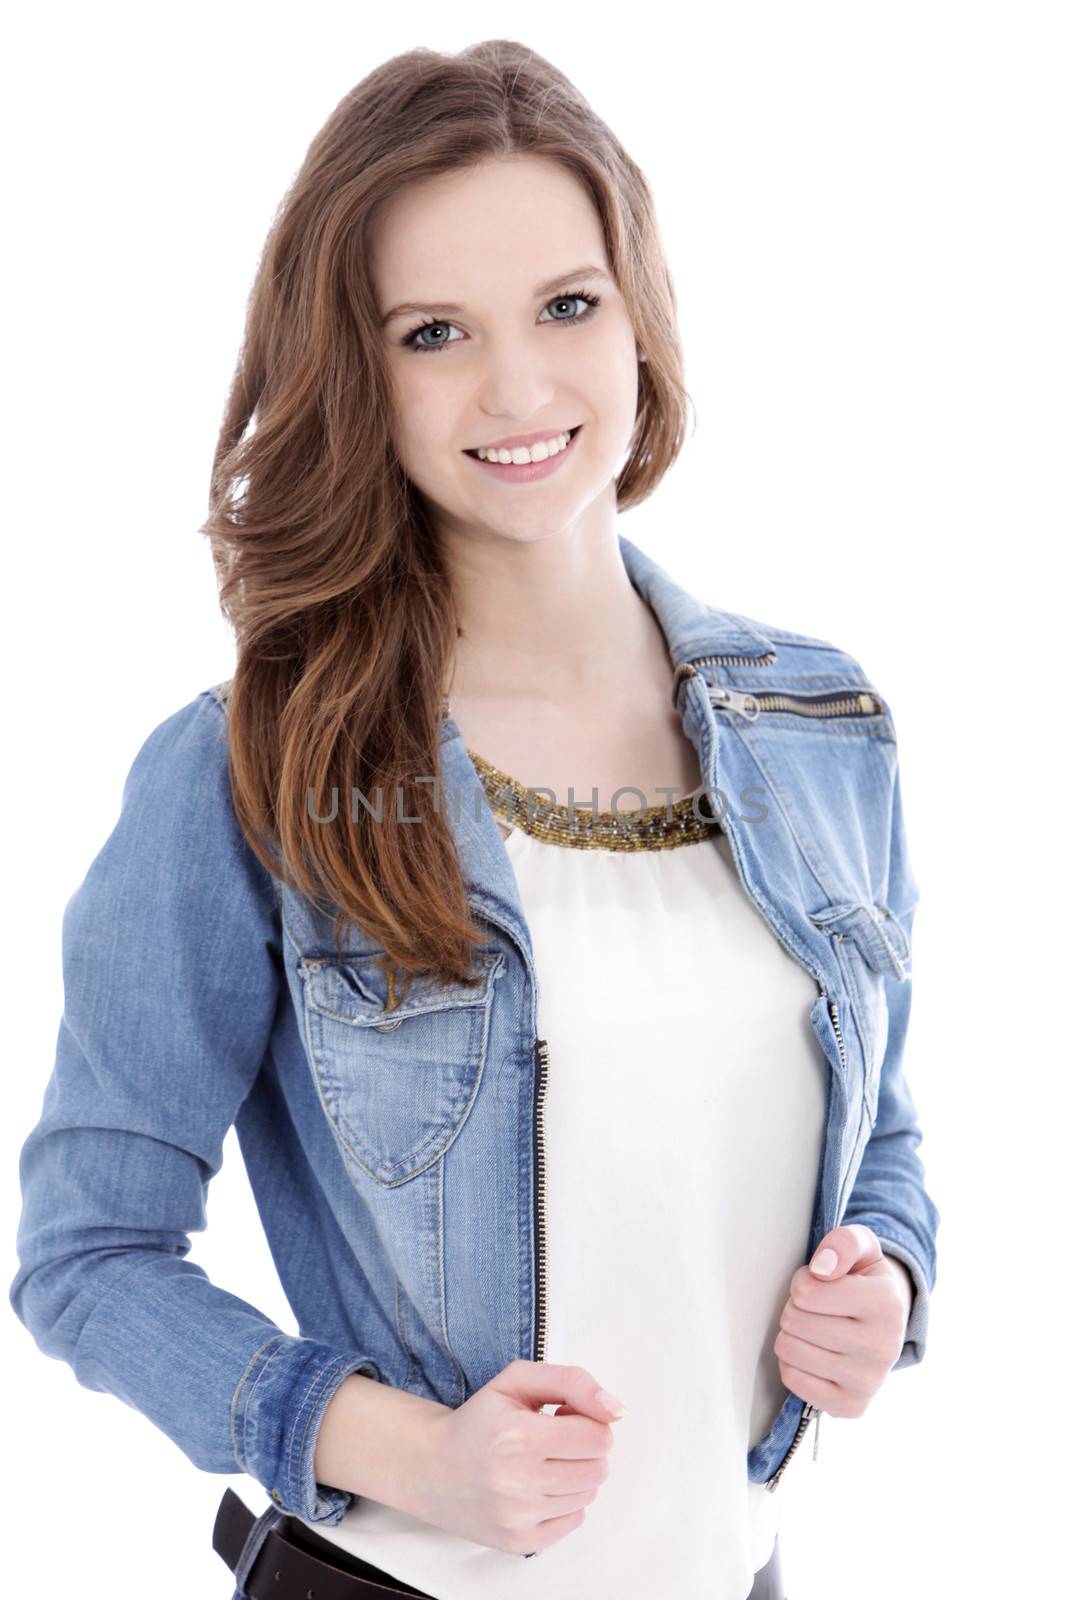 Smiling teenage woman in a trendy denim jacket looking at the camera, upper body studio portrait on white